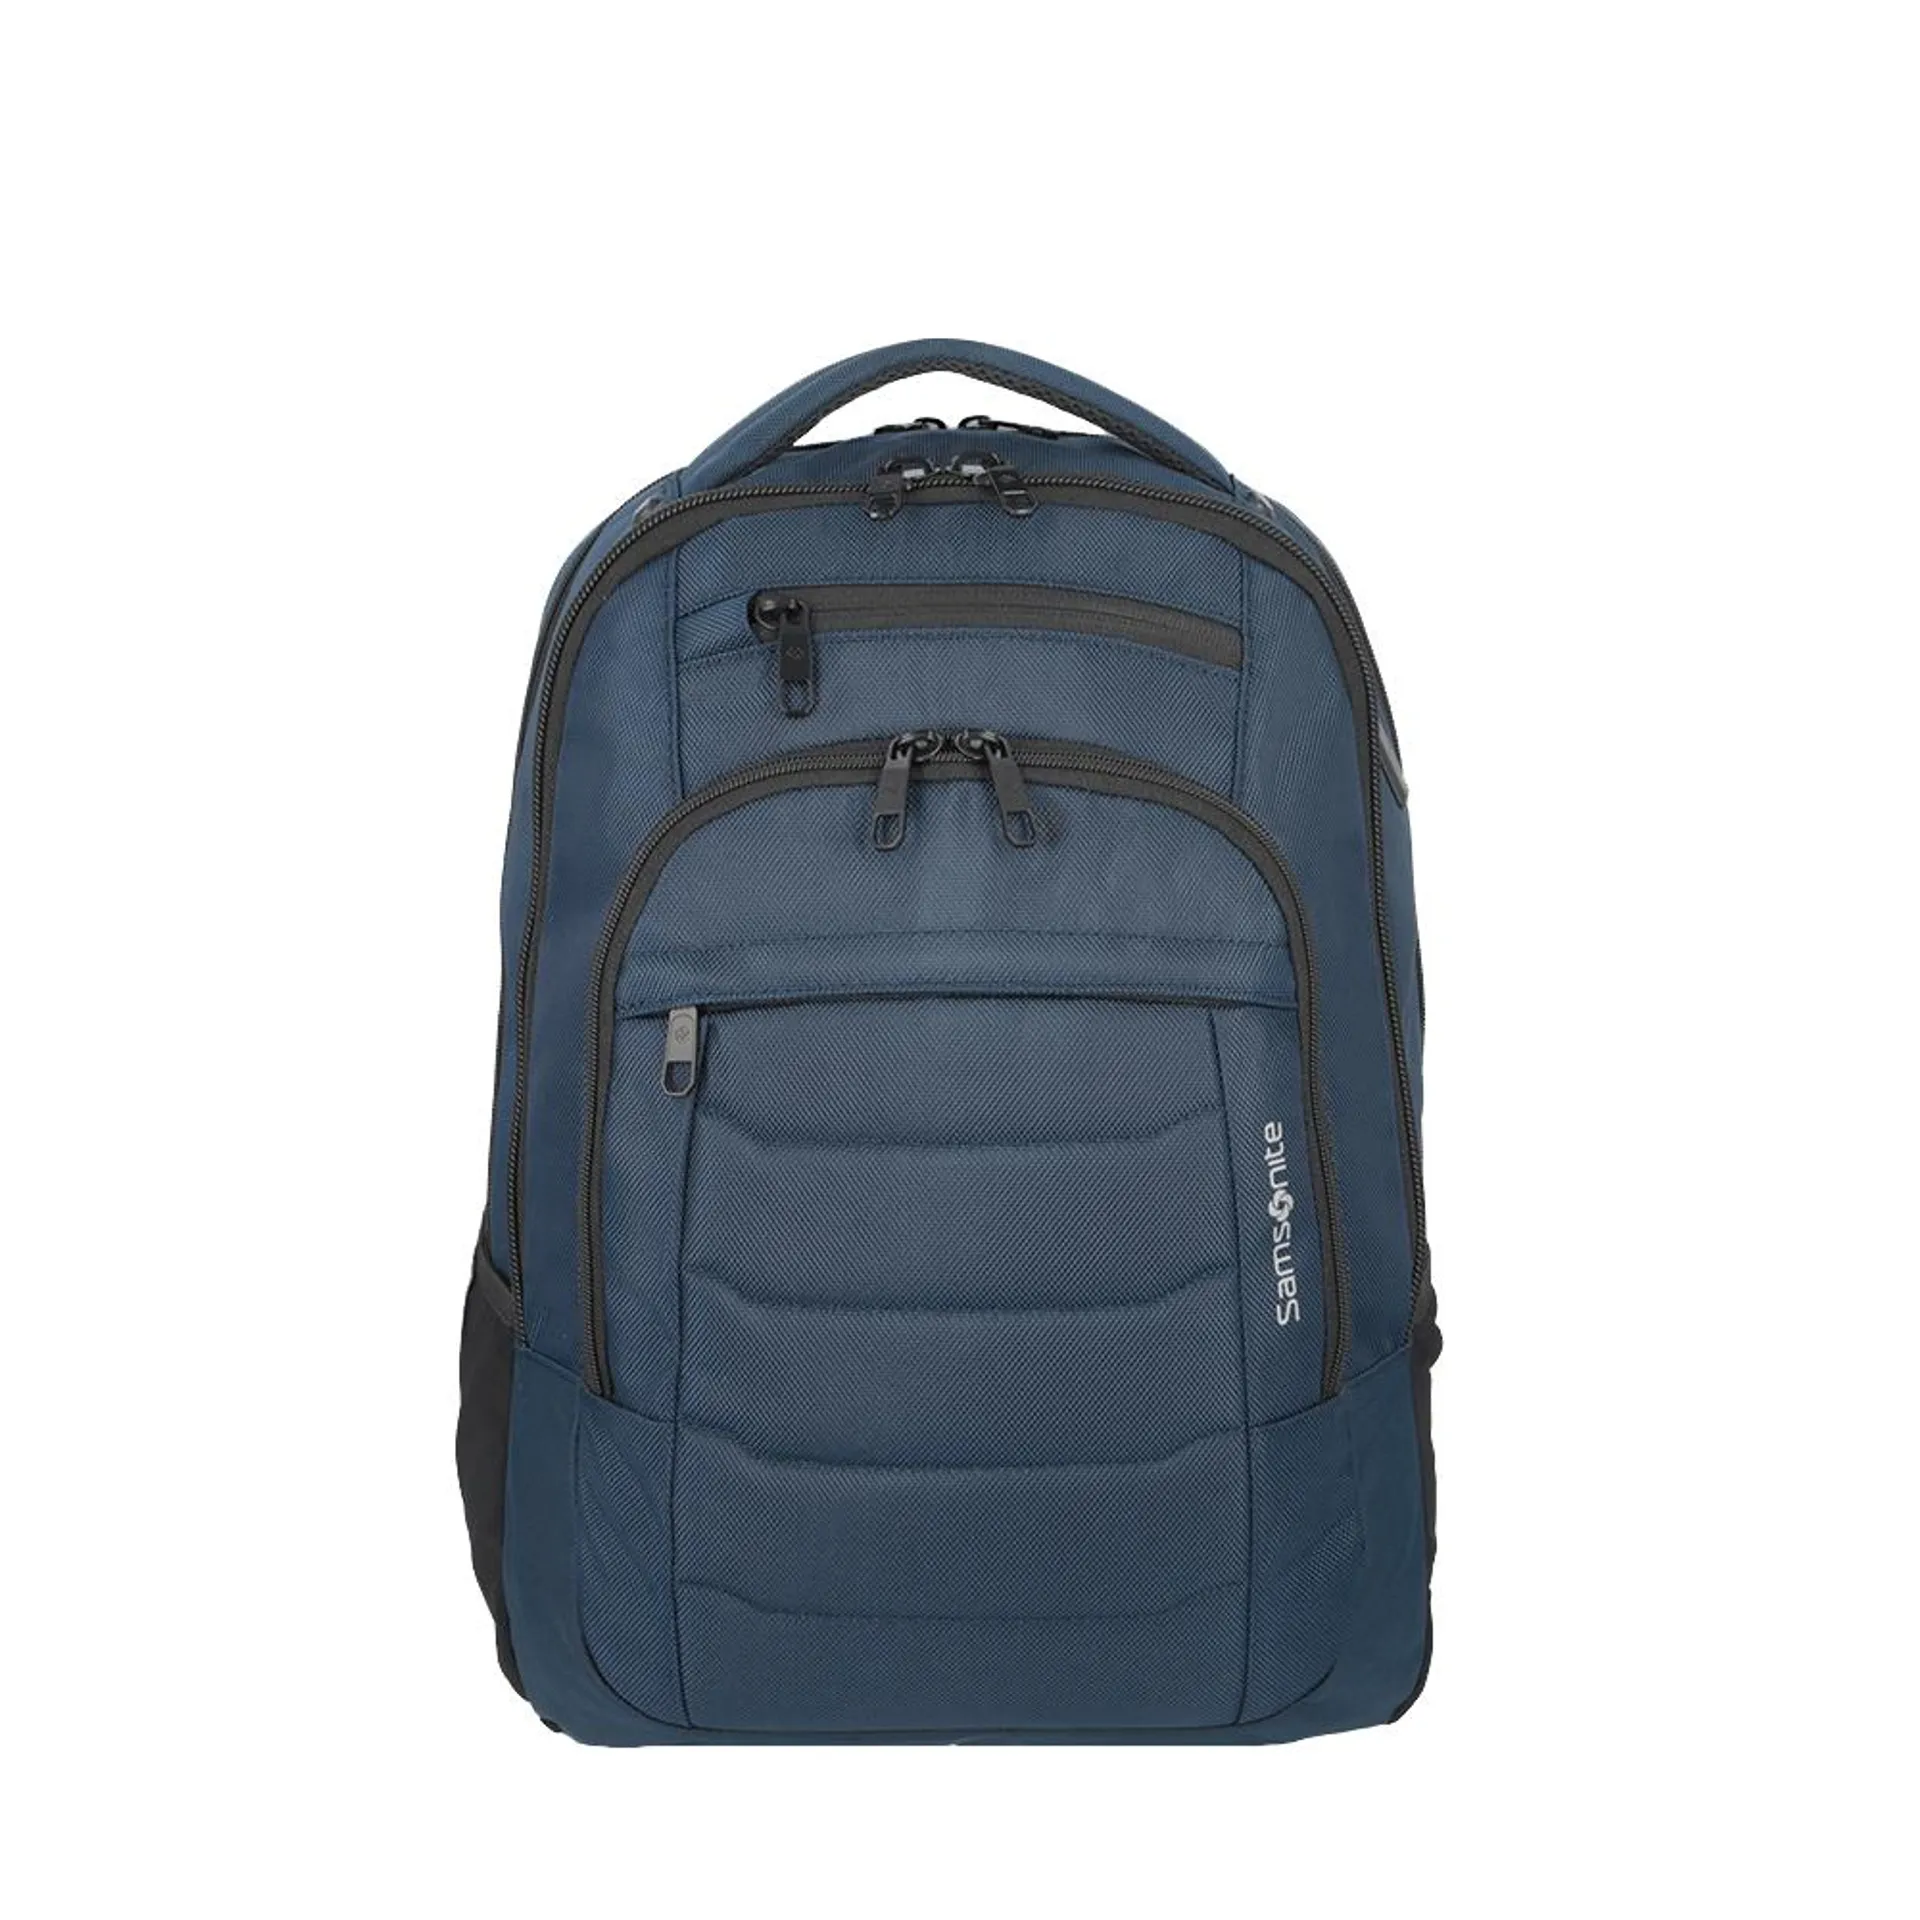 Lifestyle Backpack Acceleration Titan Navy